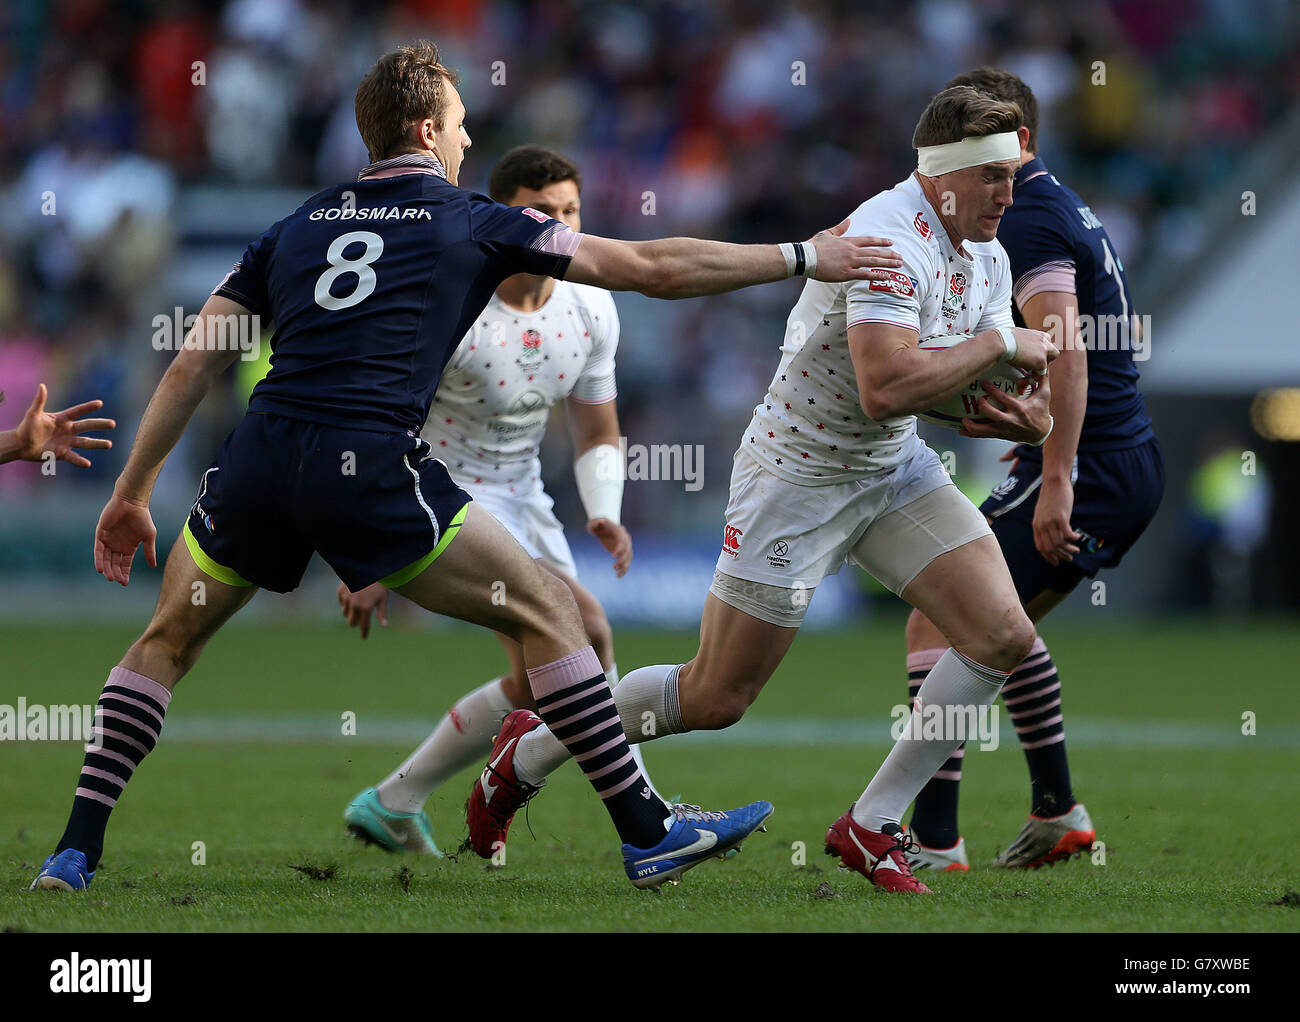 England's Phil Burgess is tackled by Scotland's Nyle Godsmark in the Pool C match during the Marriott London Sevens at Twickenham Stadium, London. PRESS ASSOCIAION Photo. Picture date: Saturday May 16, 2015. See PA story RUGBYU London. Photo credit should read: Steven Paston/PA Wire Stock Photo